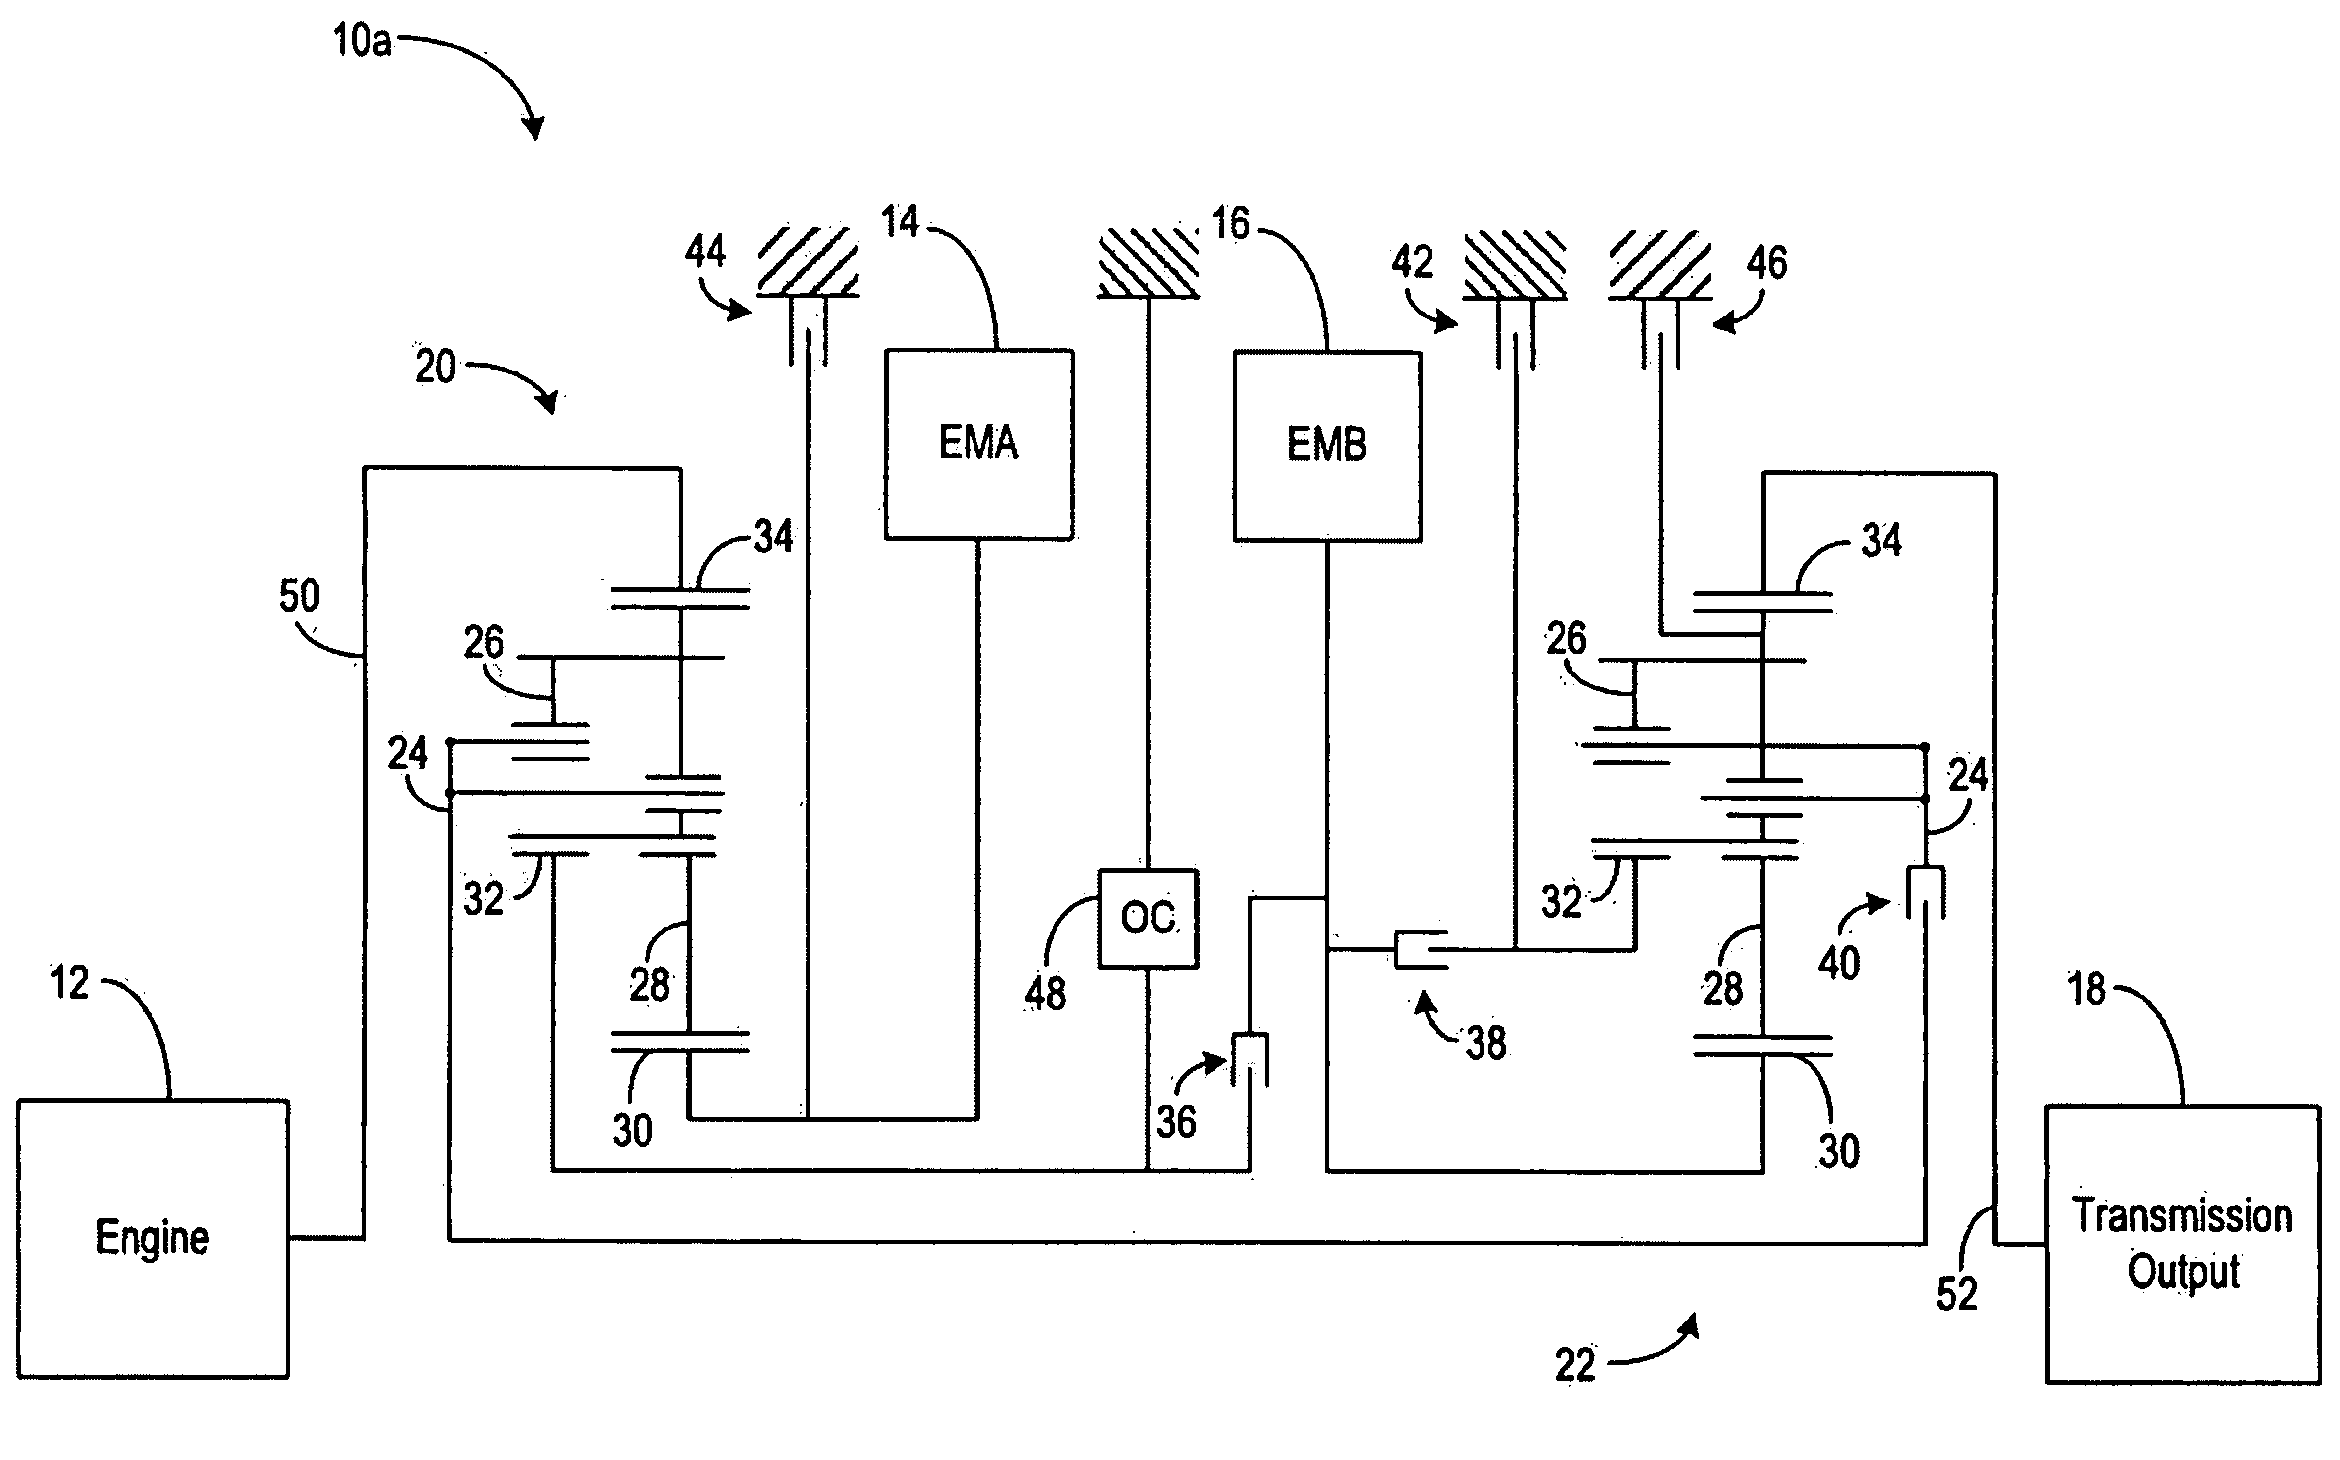 Semi-power split hybrid transmission with multiple modes and fixed gears